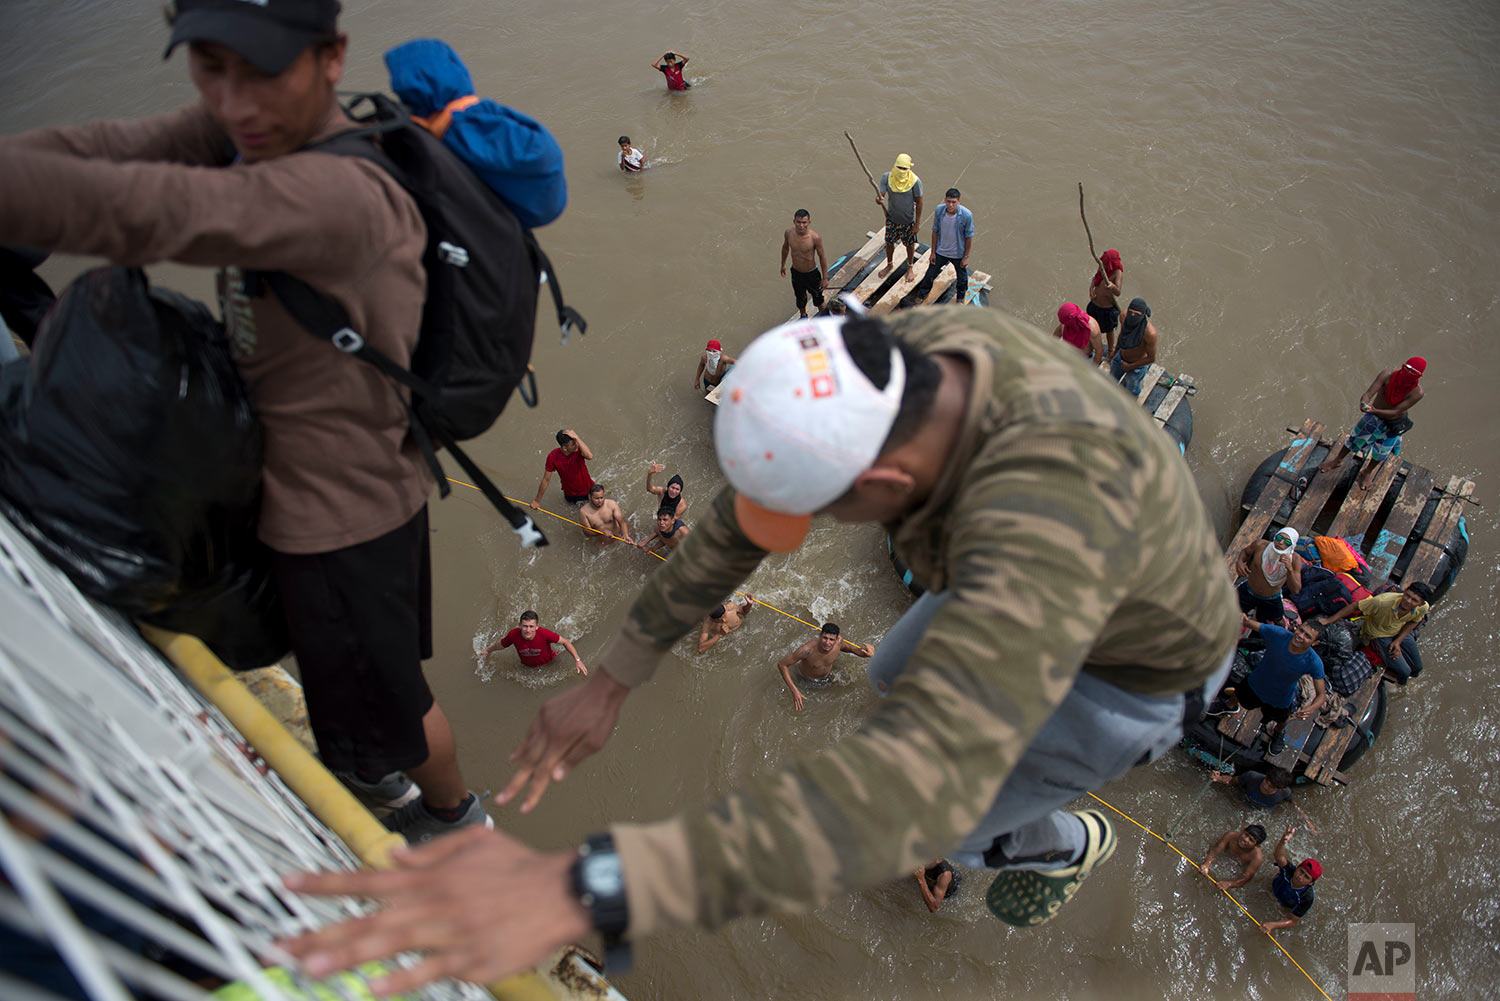  Migrants tired of waiting to cross into Mexico, jumped from a border bridge fence into the Suchiate River, in Tecun Uman, Guatemala, Friday, Oct. 19, 2018. (AP Photo/Oliver de Ros) 